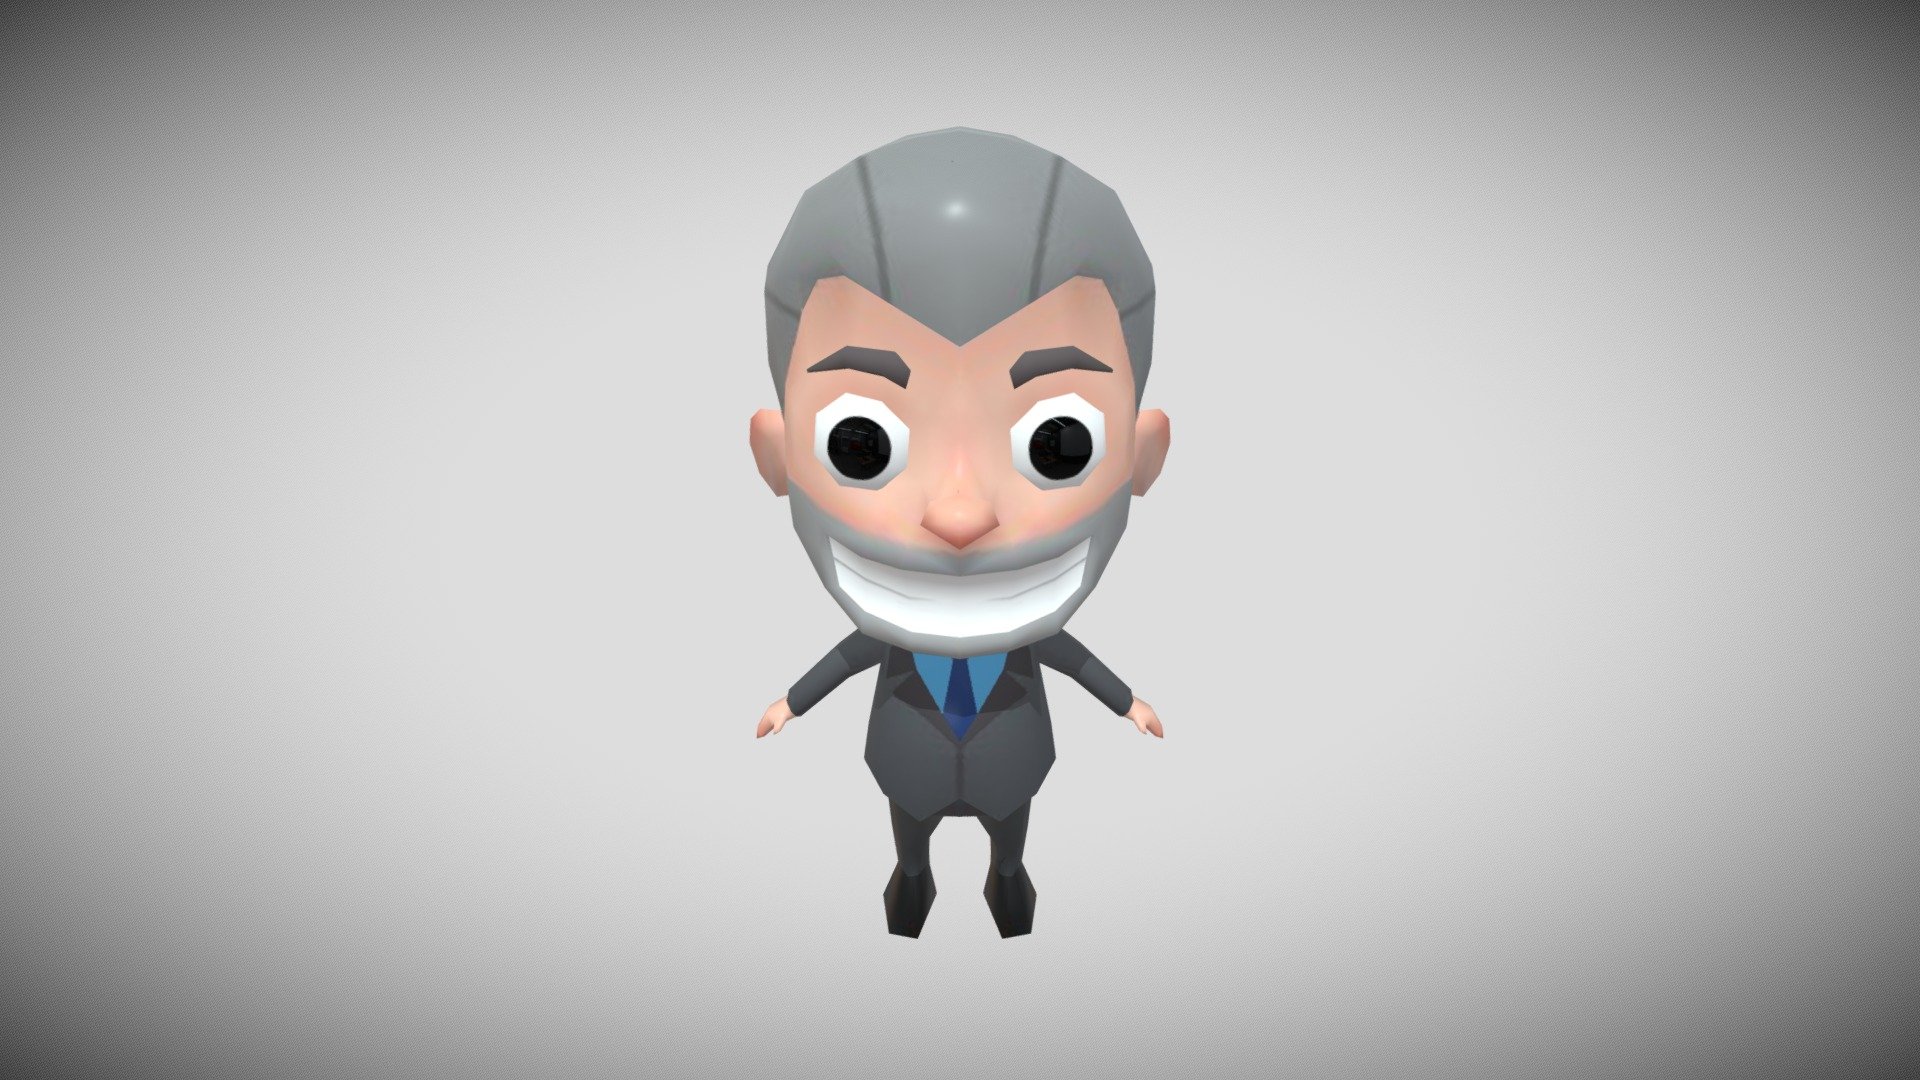 This is a 3D version of the Manager character from the game Idle Miner. The model was created to work in a isometric environment and with a focus on respecting the performance budget rquired for games on a mobile platform. The modeling and UV mapping were done in Blender, taking advantage of the modifier workflow, while the textures were produced in Substance Painter 3d model